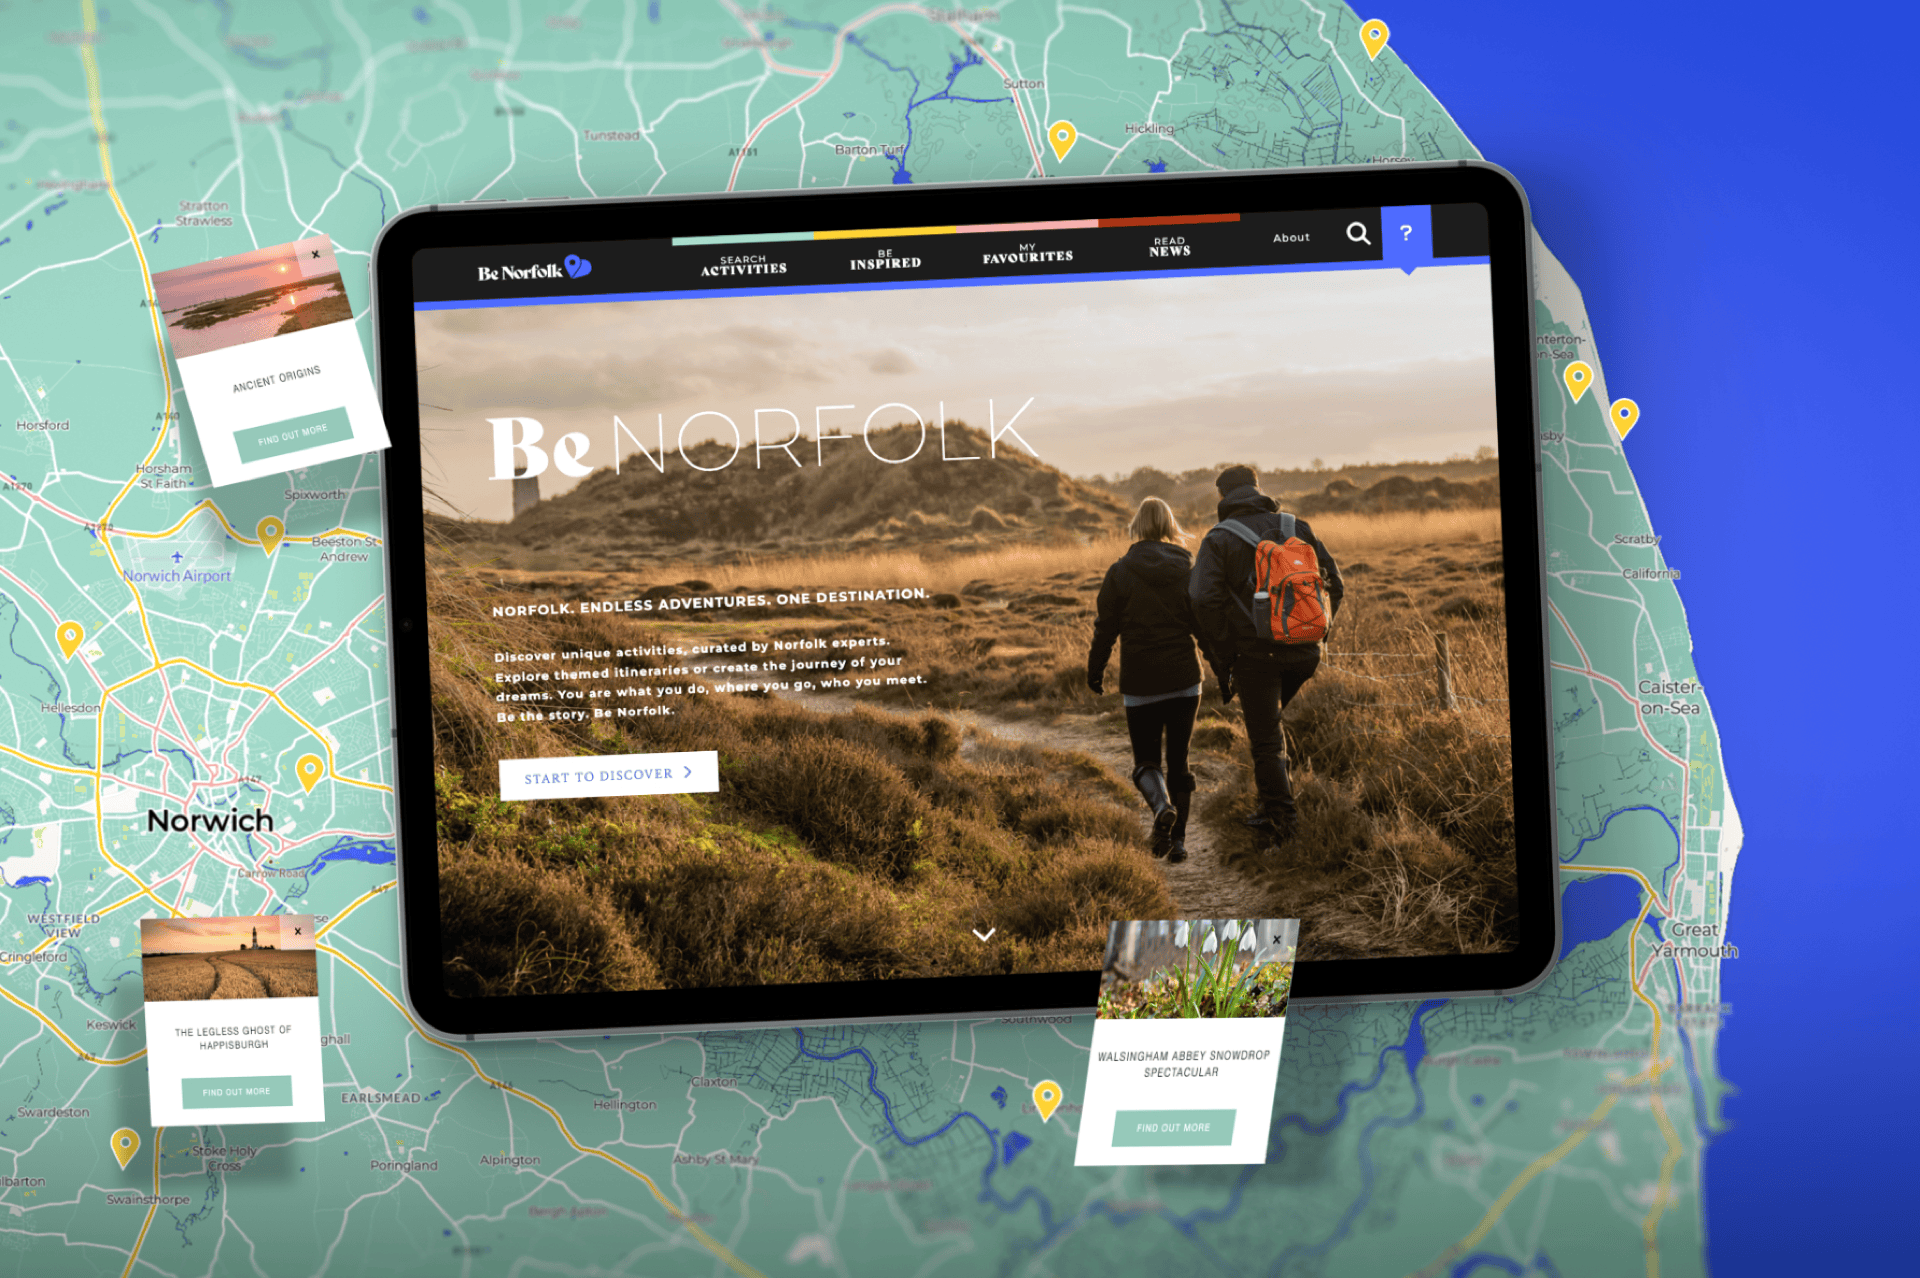 The BeNorfolk website homepage posed on an iPad background over the activities map.